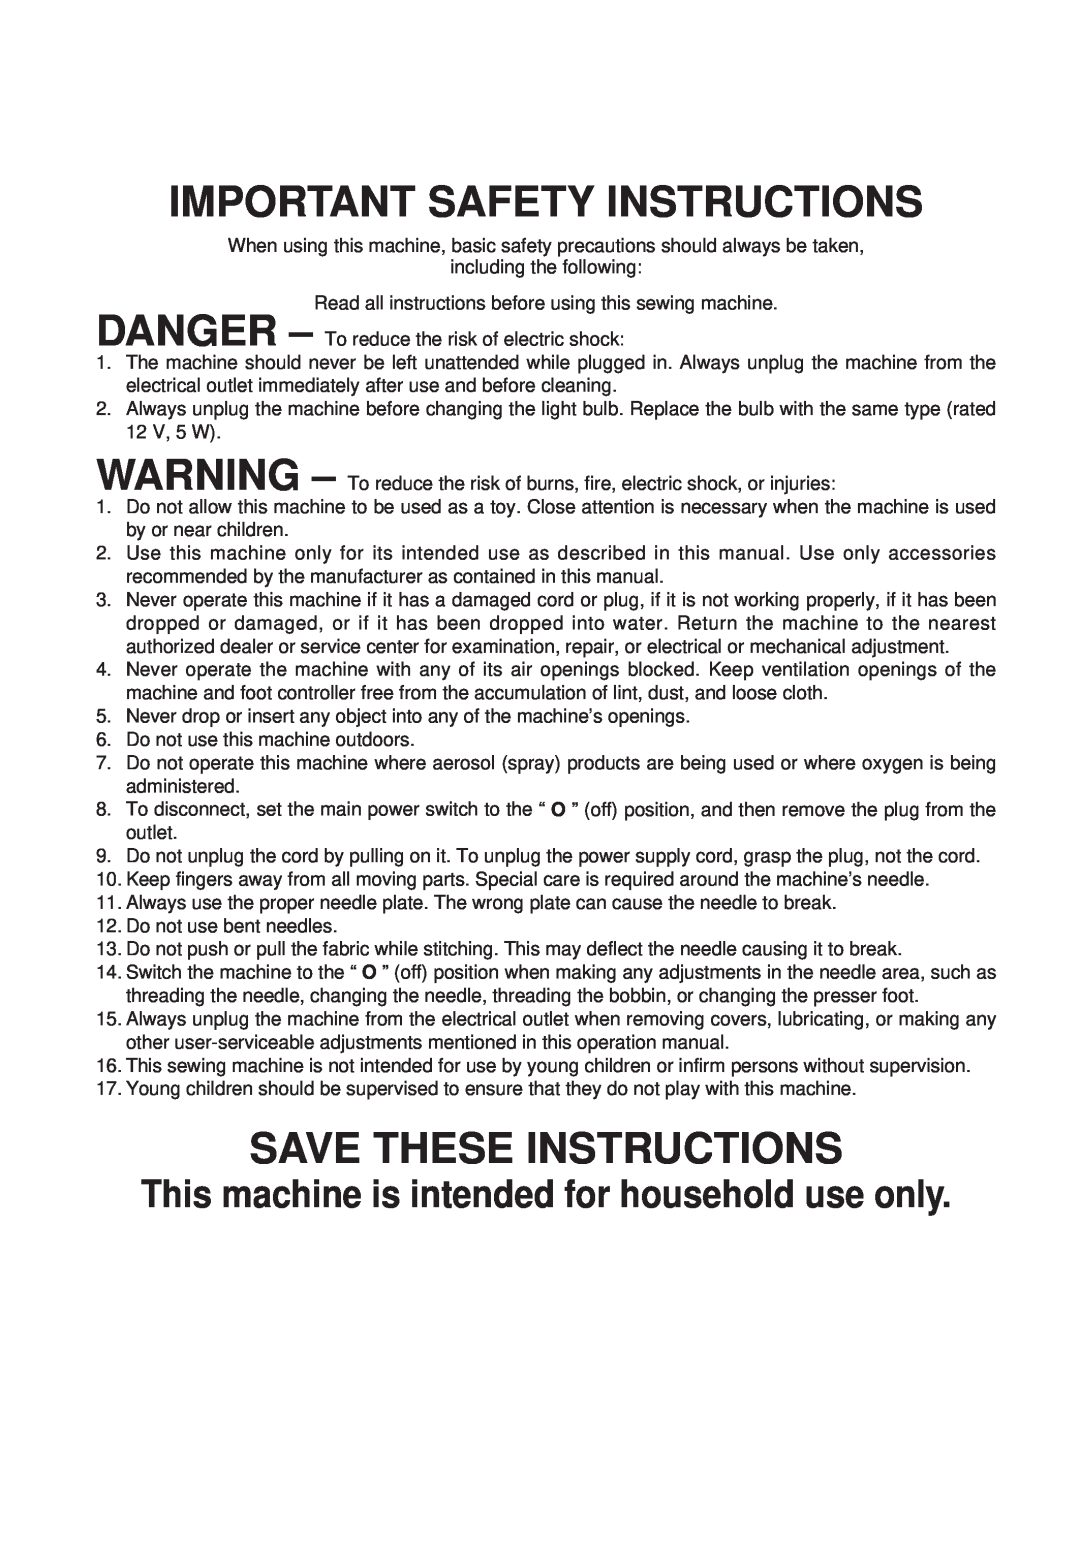 Brother PC 6500 Important Safety Instructions, Save These Instructions, This machine is intended for household use only 